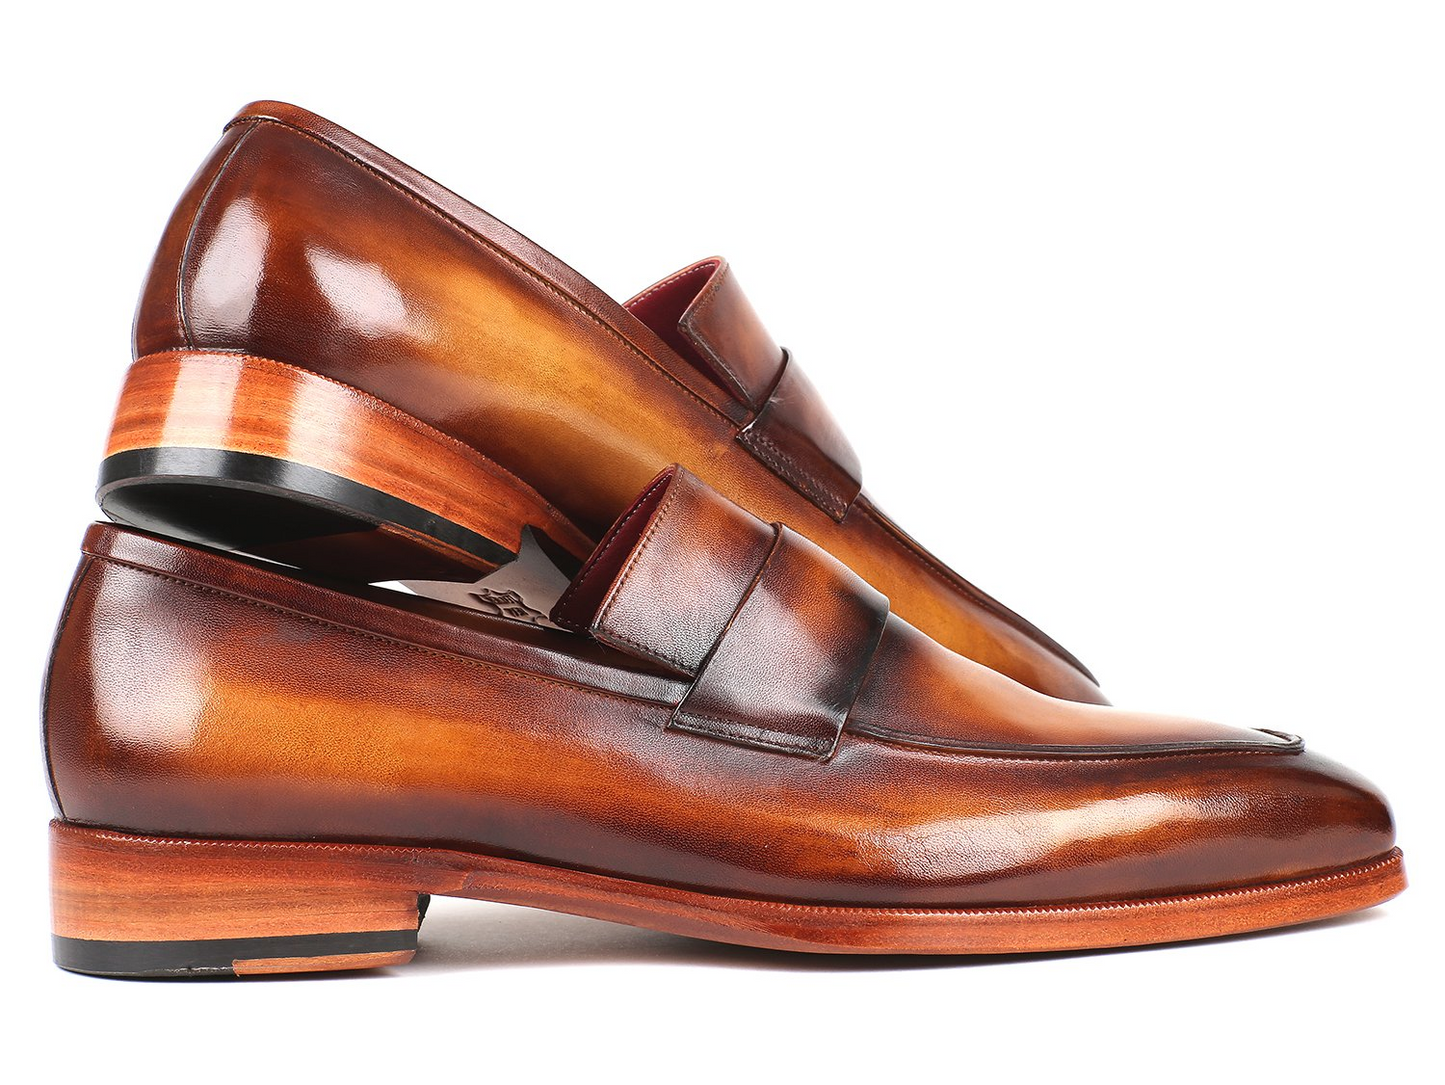 Burnished Loafers Brown, Handmade to order.